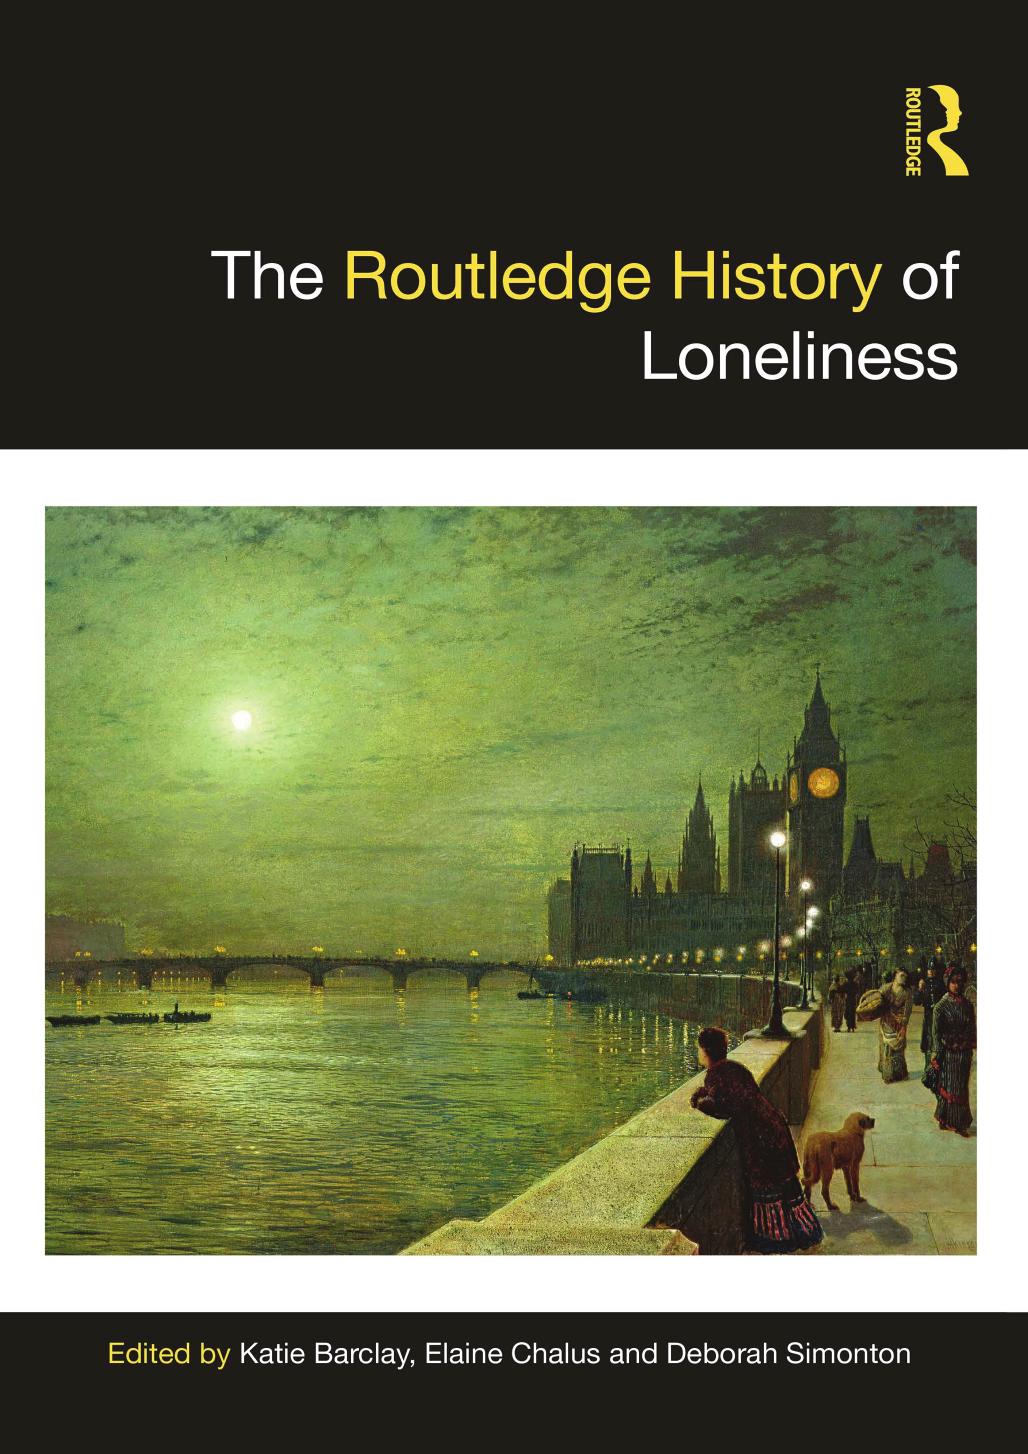 The Routledge History of Loneliness by Katie Barclay (editor); Elaine Chalus (editor); Deborah Simonton (editor)